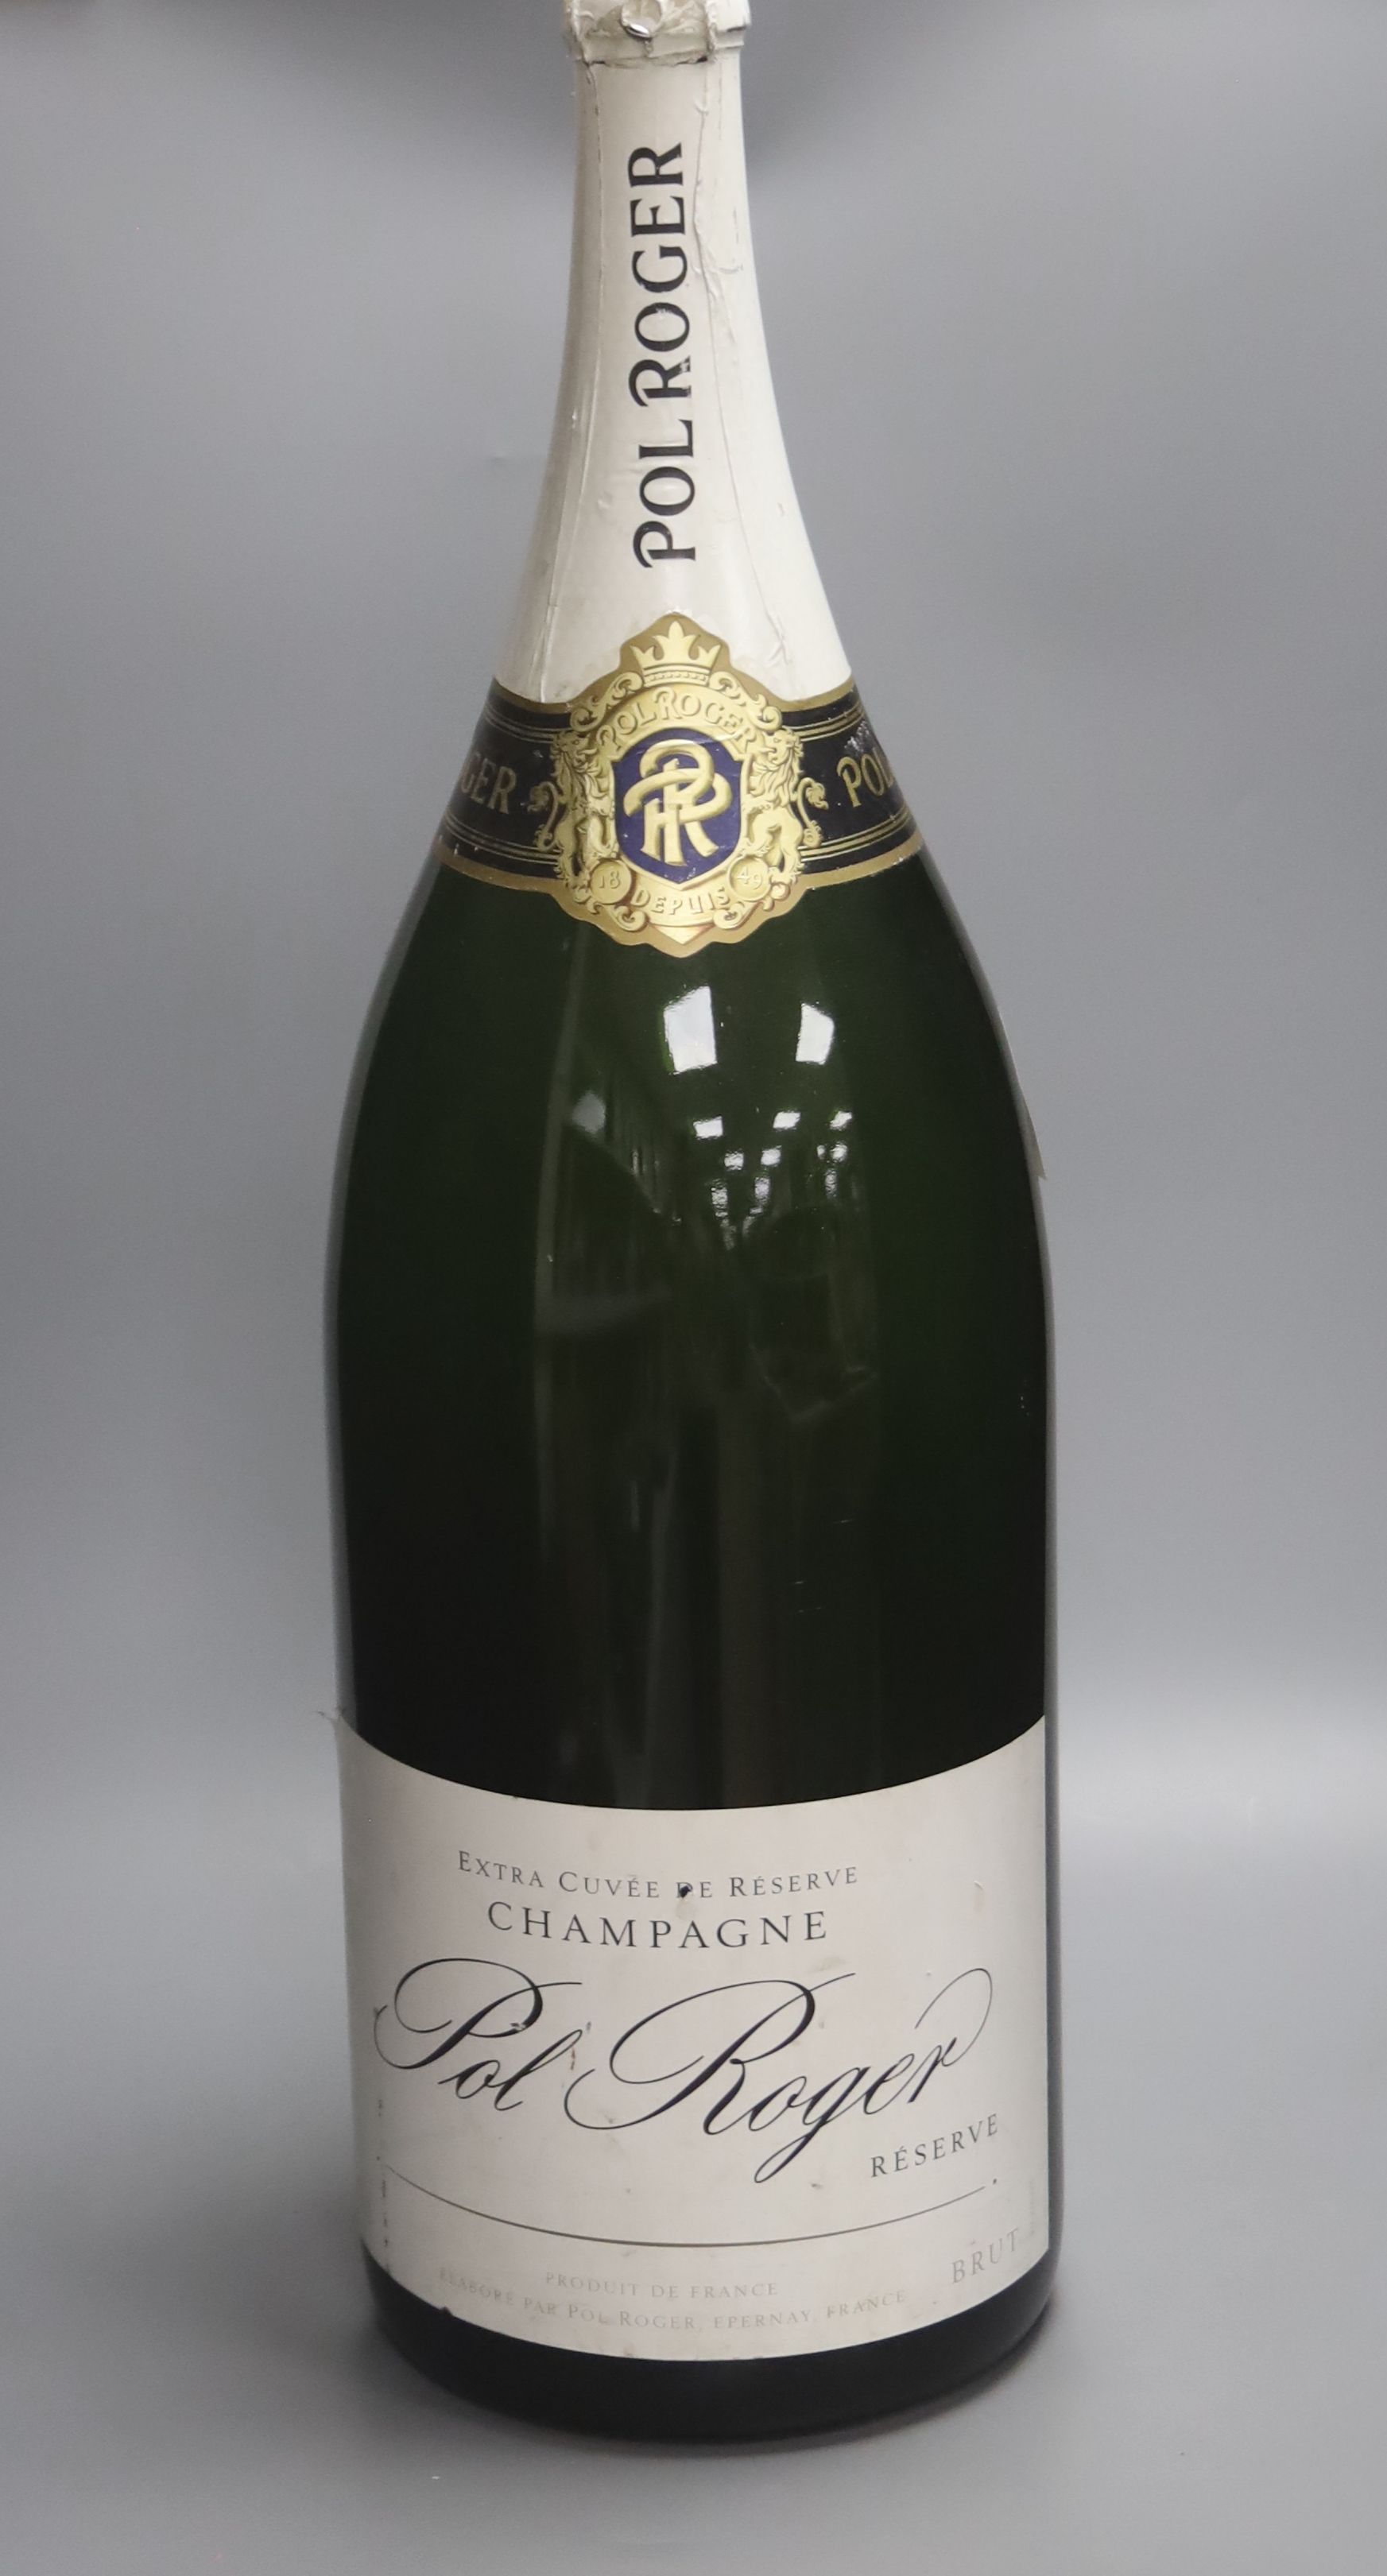 A vacant Nebuchadnezzar bottle of Pol Roger reserve champagne, 72cm high